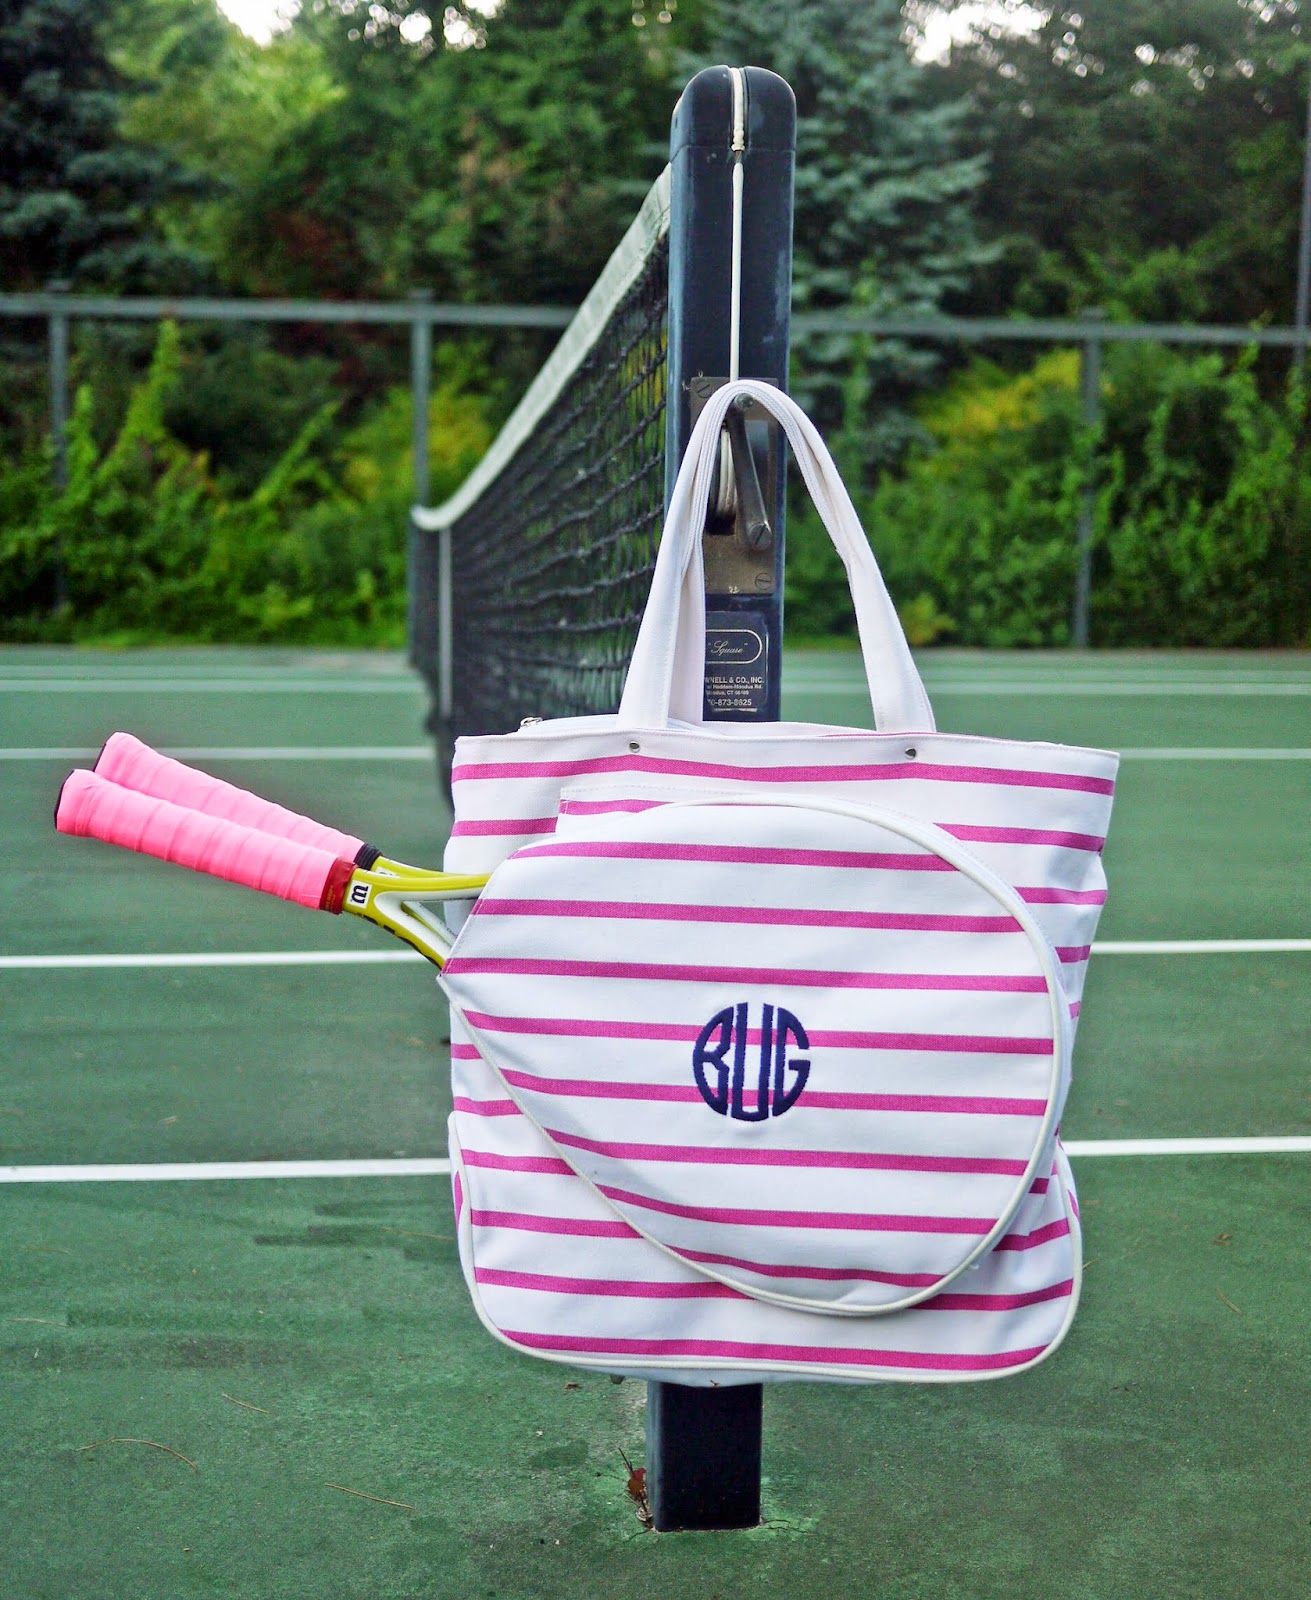 Back in Stock: Monogram Tennis Bags! - The Buggy Blog